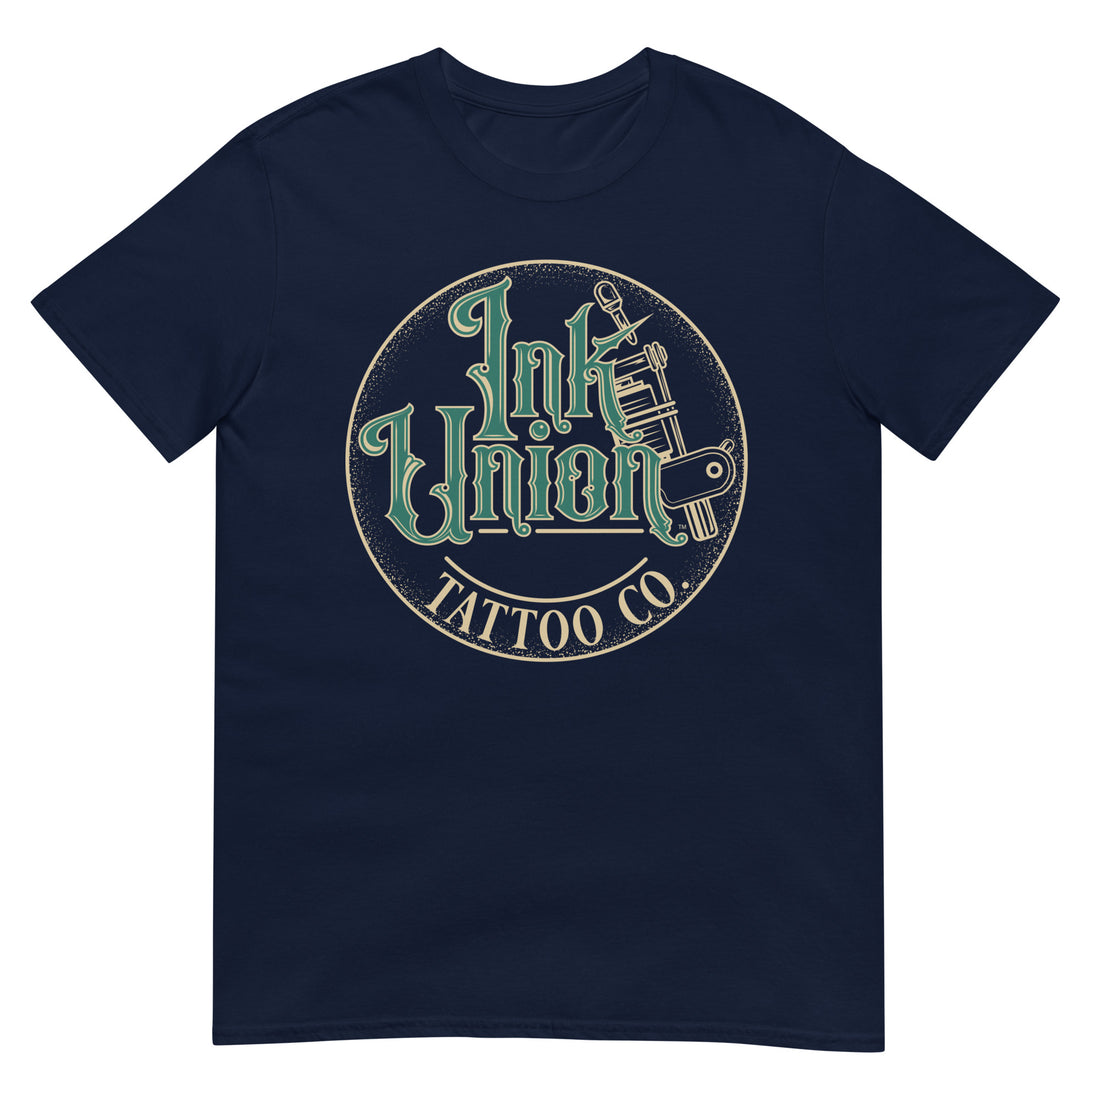 A navy blue t-shirt with a gold circle containing fancy lettering in green and gold that says Ink Union and a gold tattoo machine peeking out from behind on the right side.  There is a dot work gradient inside the circle, and the words Tattoo Co. in gold are at the bottom of the design.